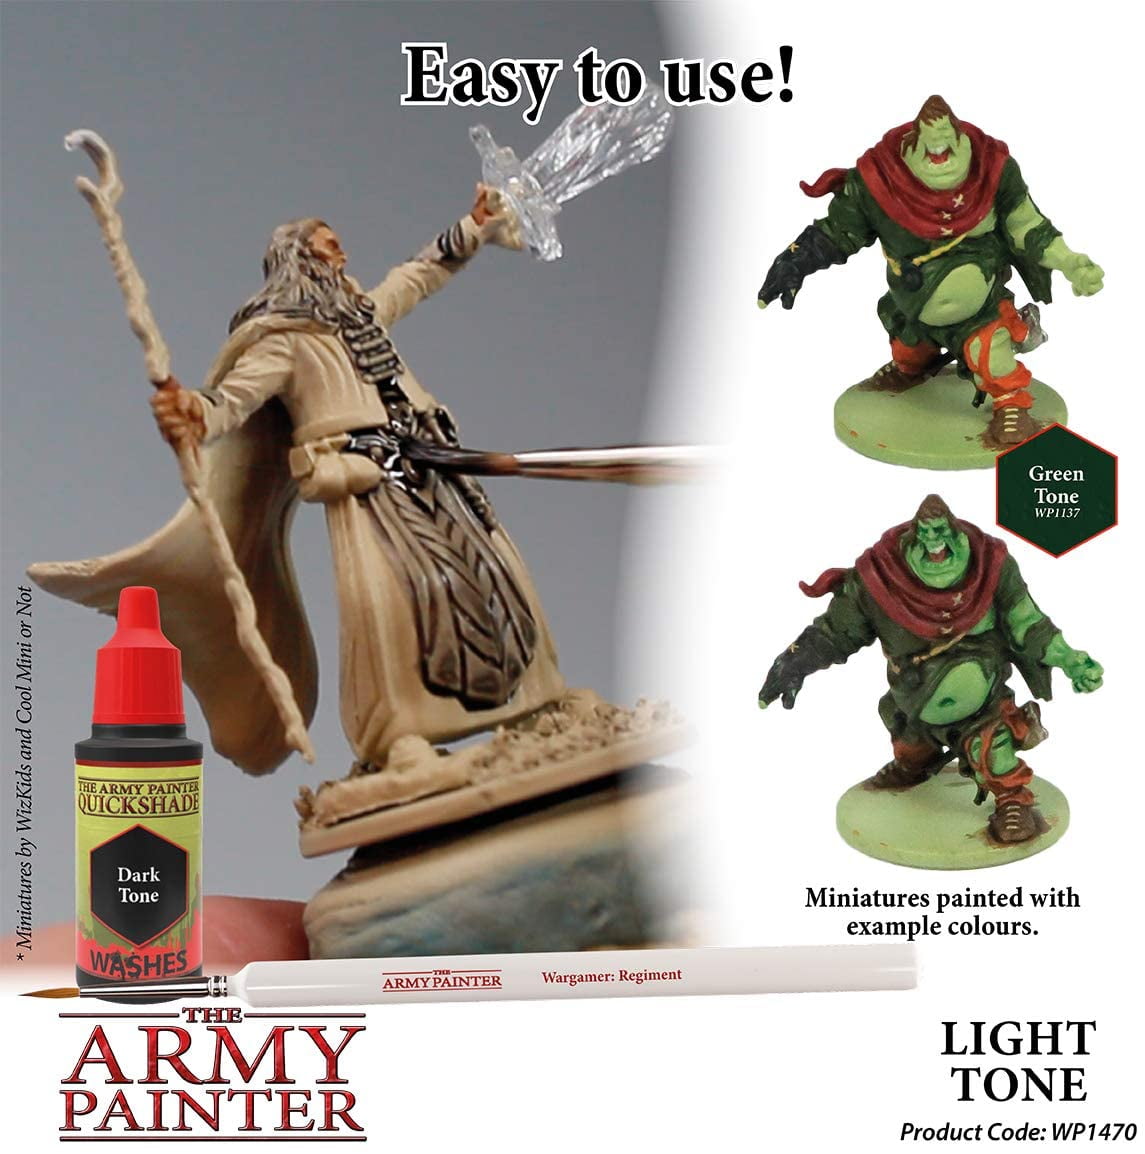 How I Used The Army Painter on my Enlightened - Must Contain Minis